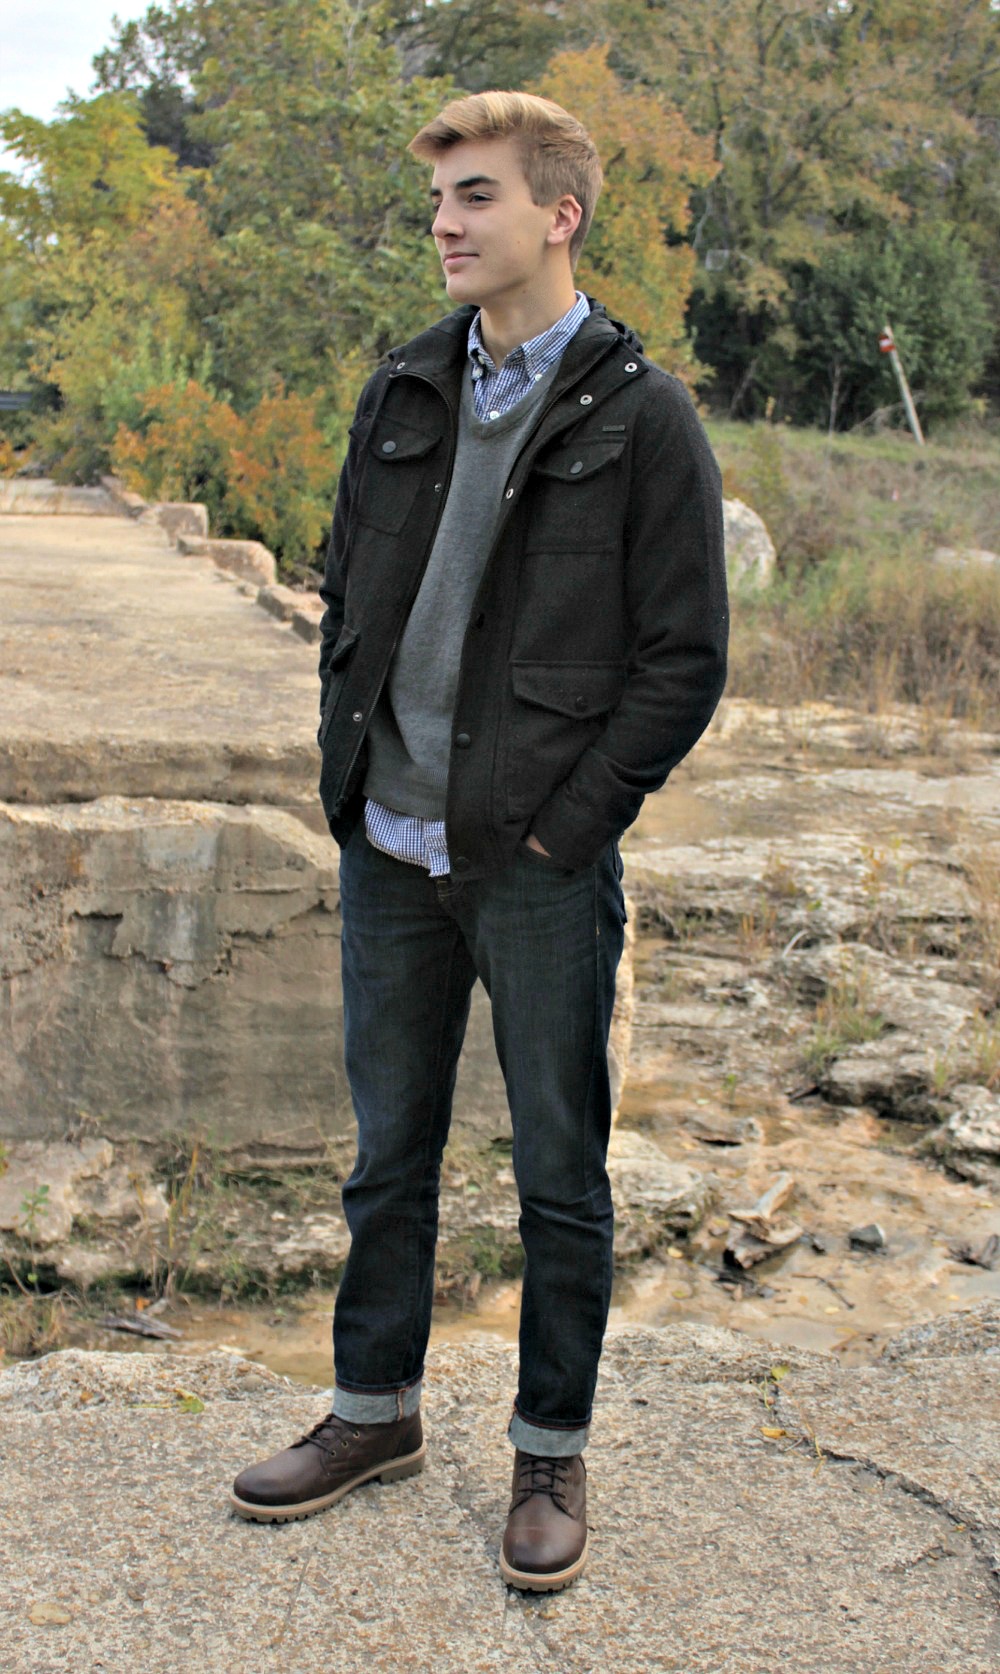 Men's Outfit Ideas Featuring Boots